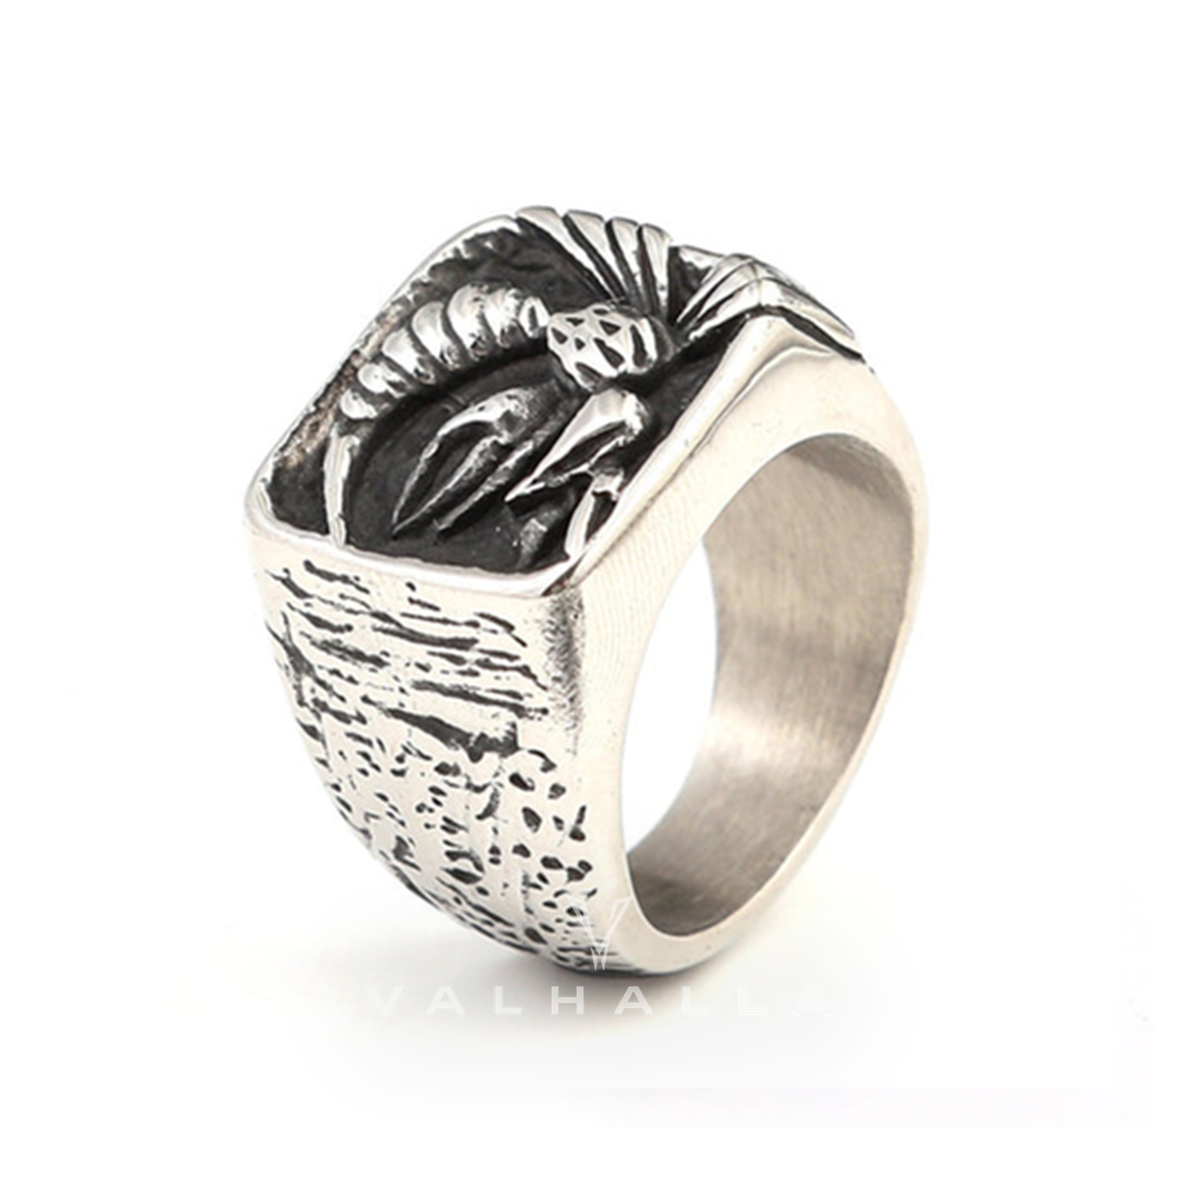 Venomous Wasp Stainless Steel Animal Ring